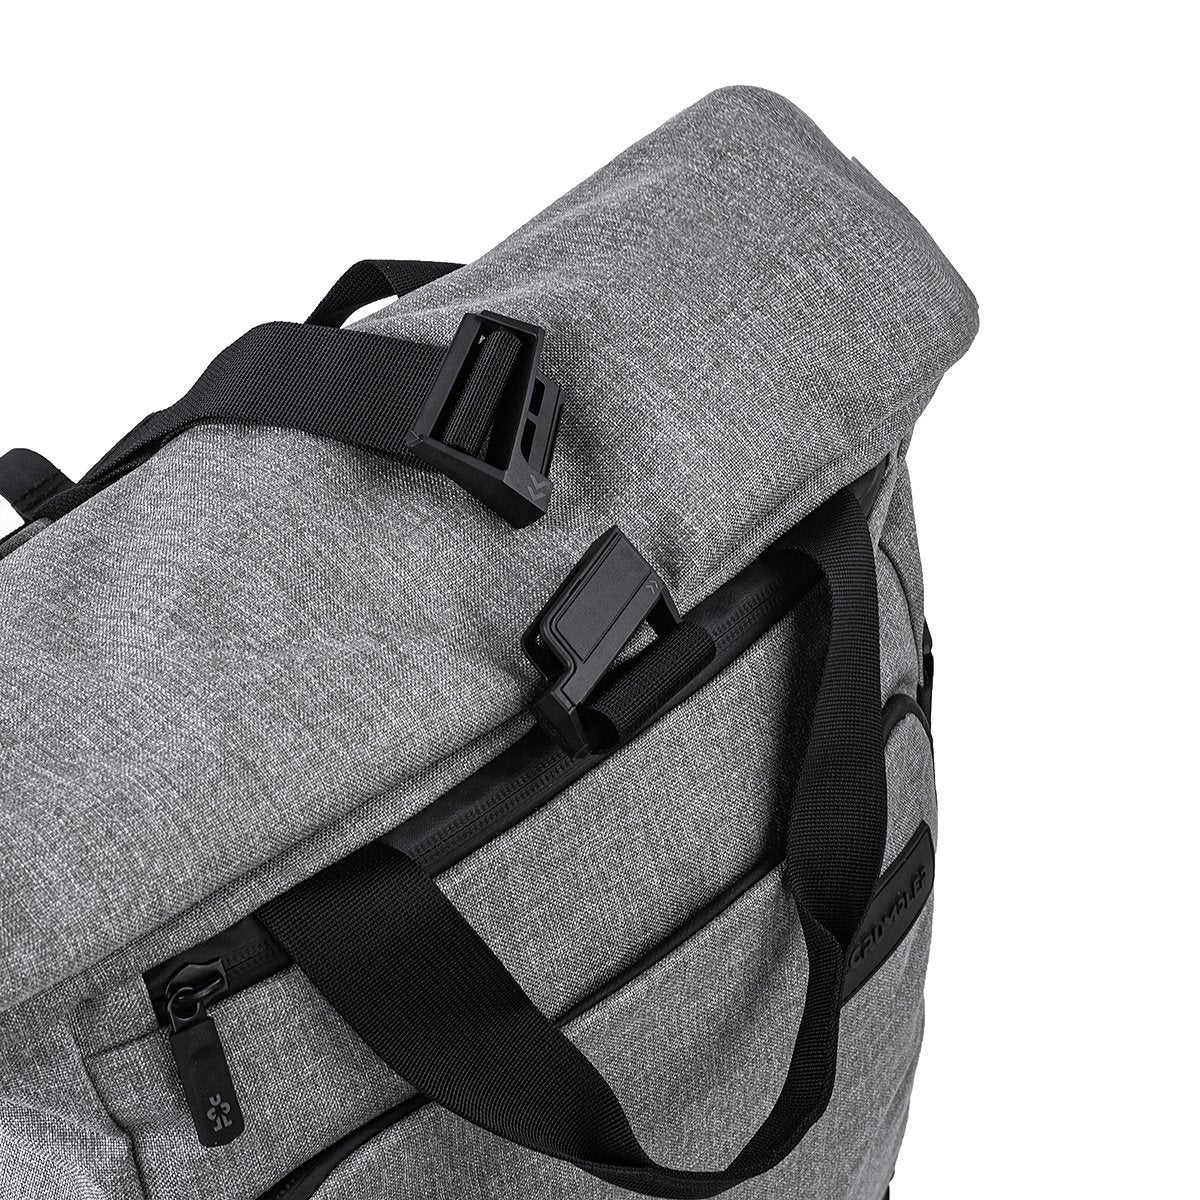 Crumpler Conversion Rolltop Backpack - #product-type#